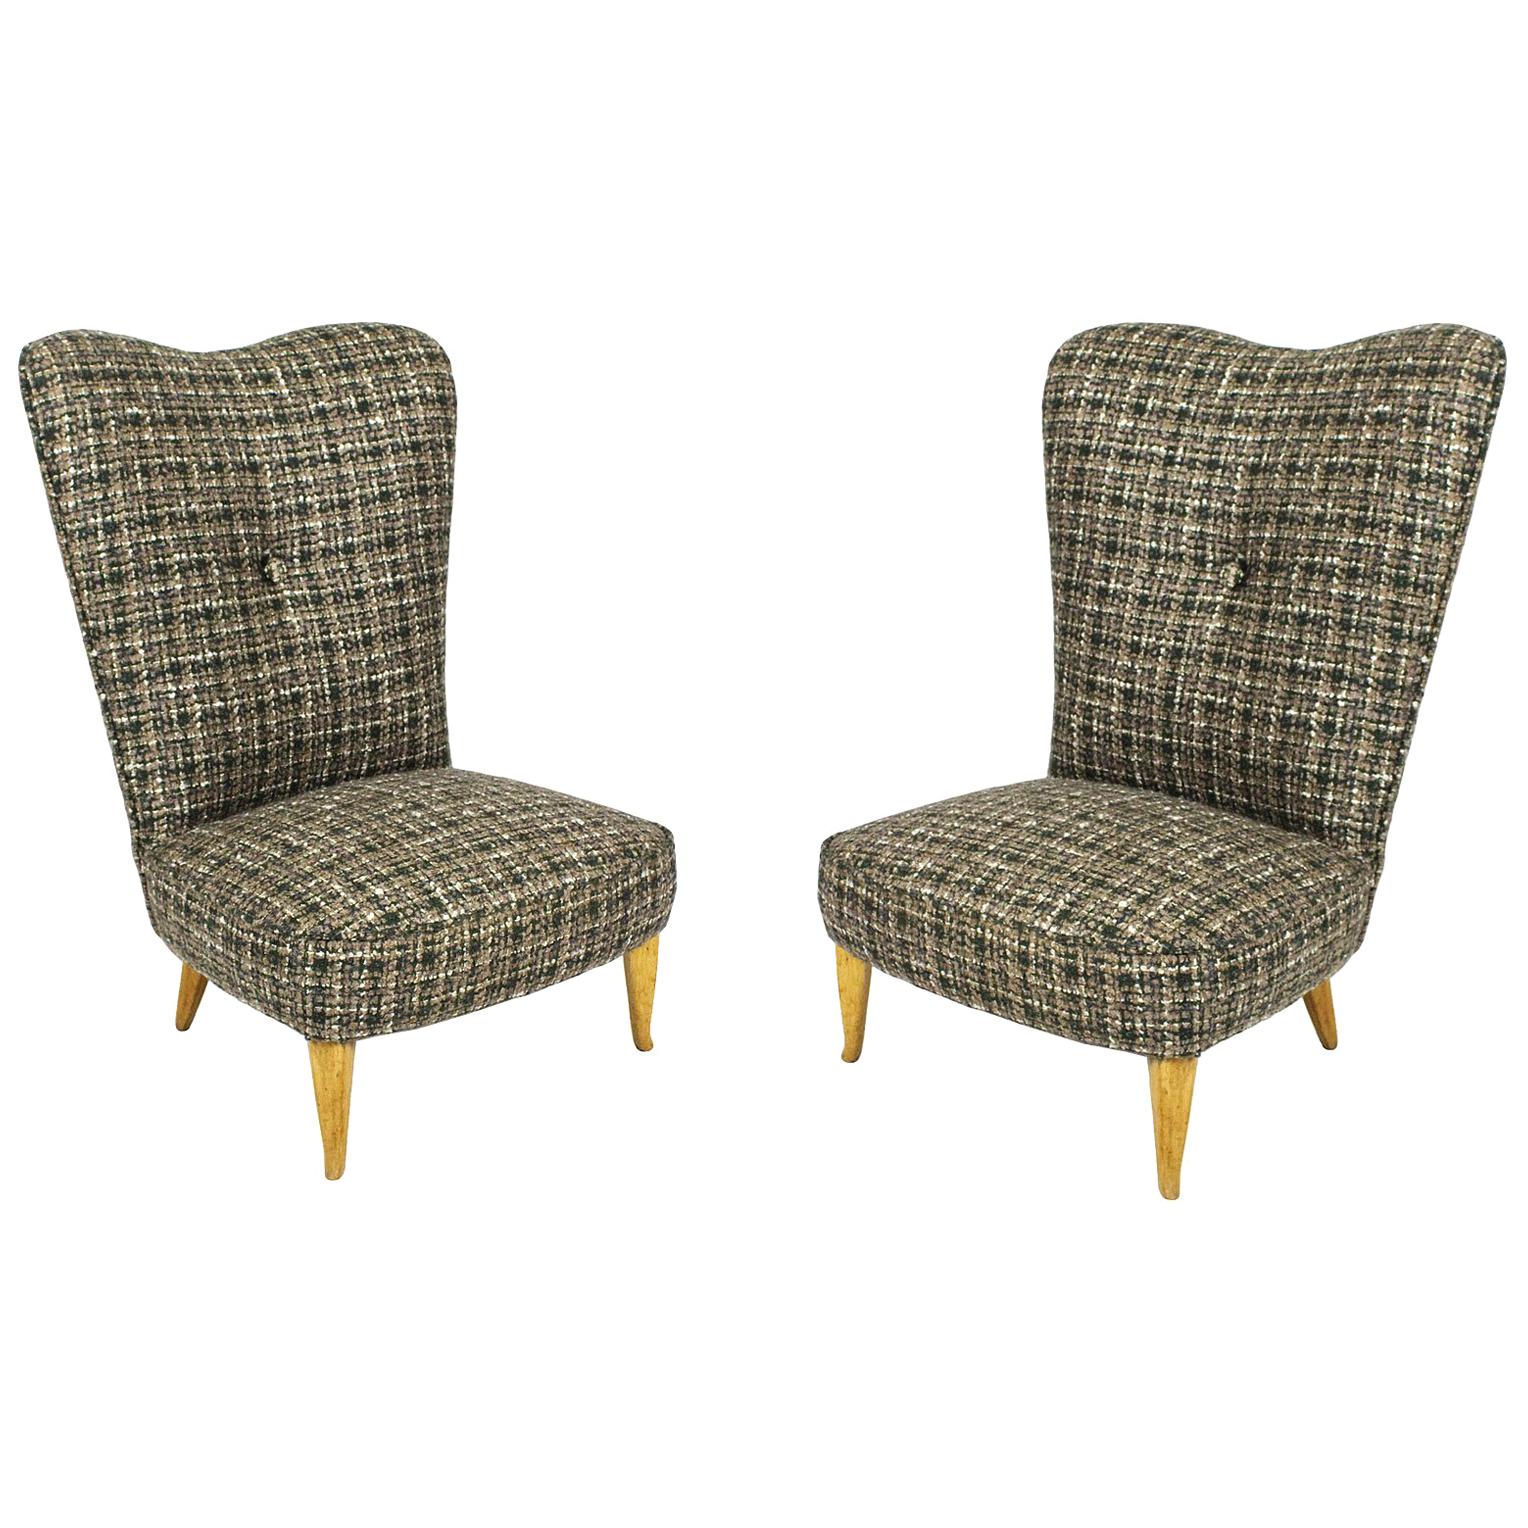 Pair of Mid-Century Modern Low Chairs in Green, Beige and White Wool - Italy